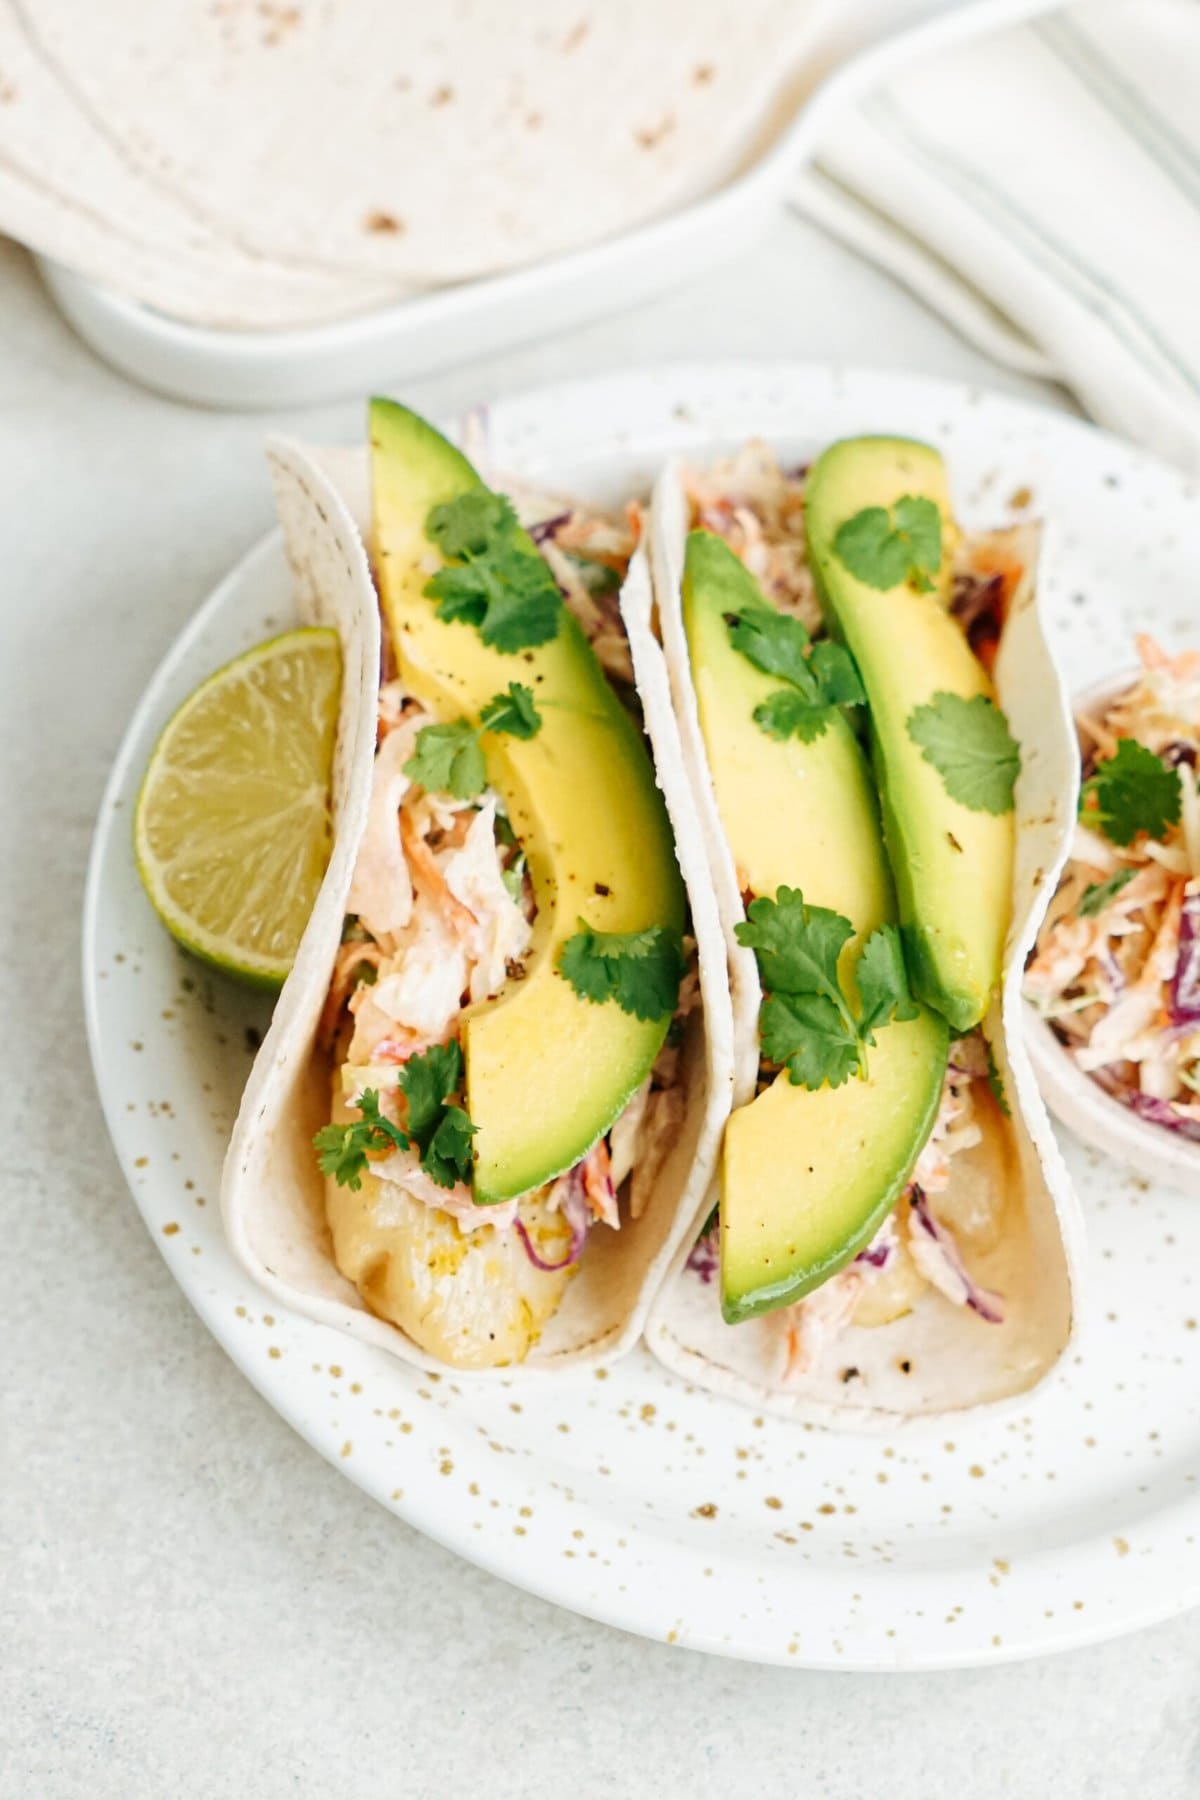 Three fish tacos garnished with avocado slices and cilantro, served with a lime wedge on the side.